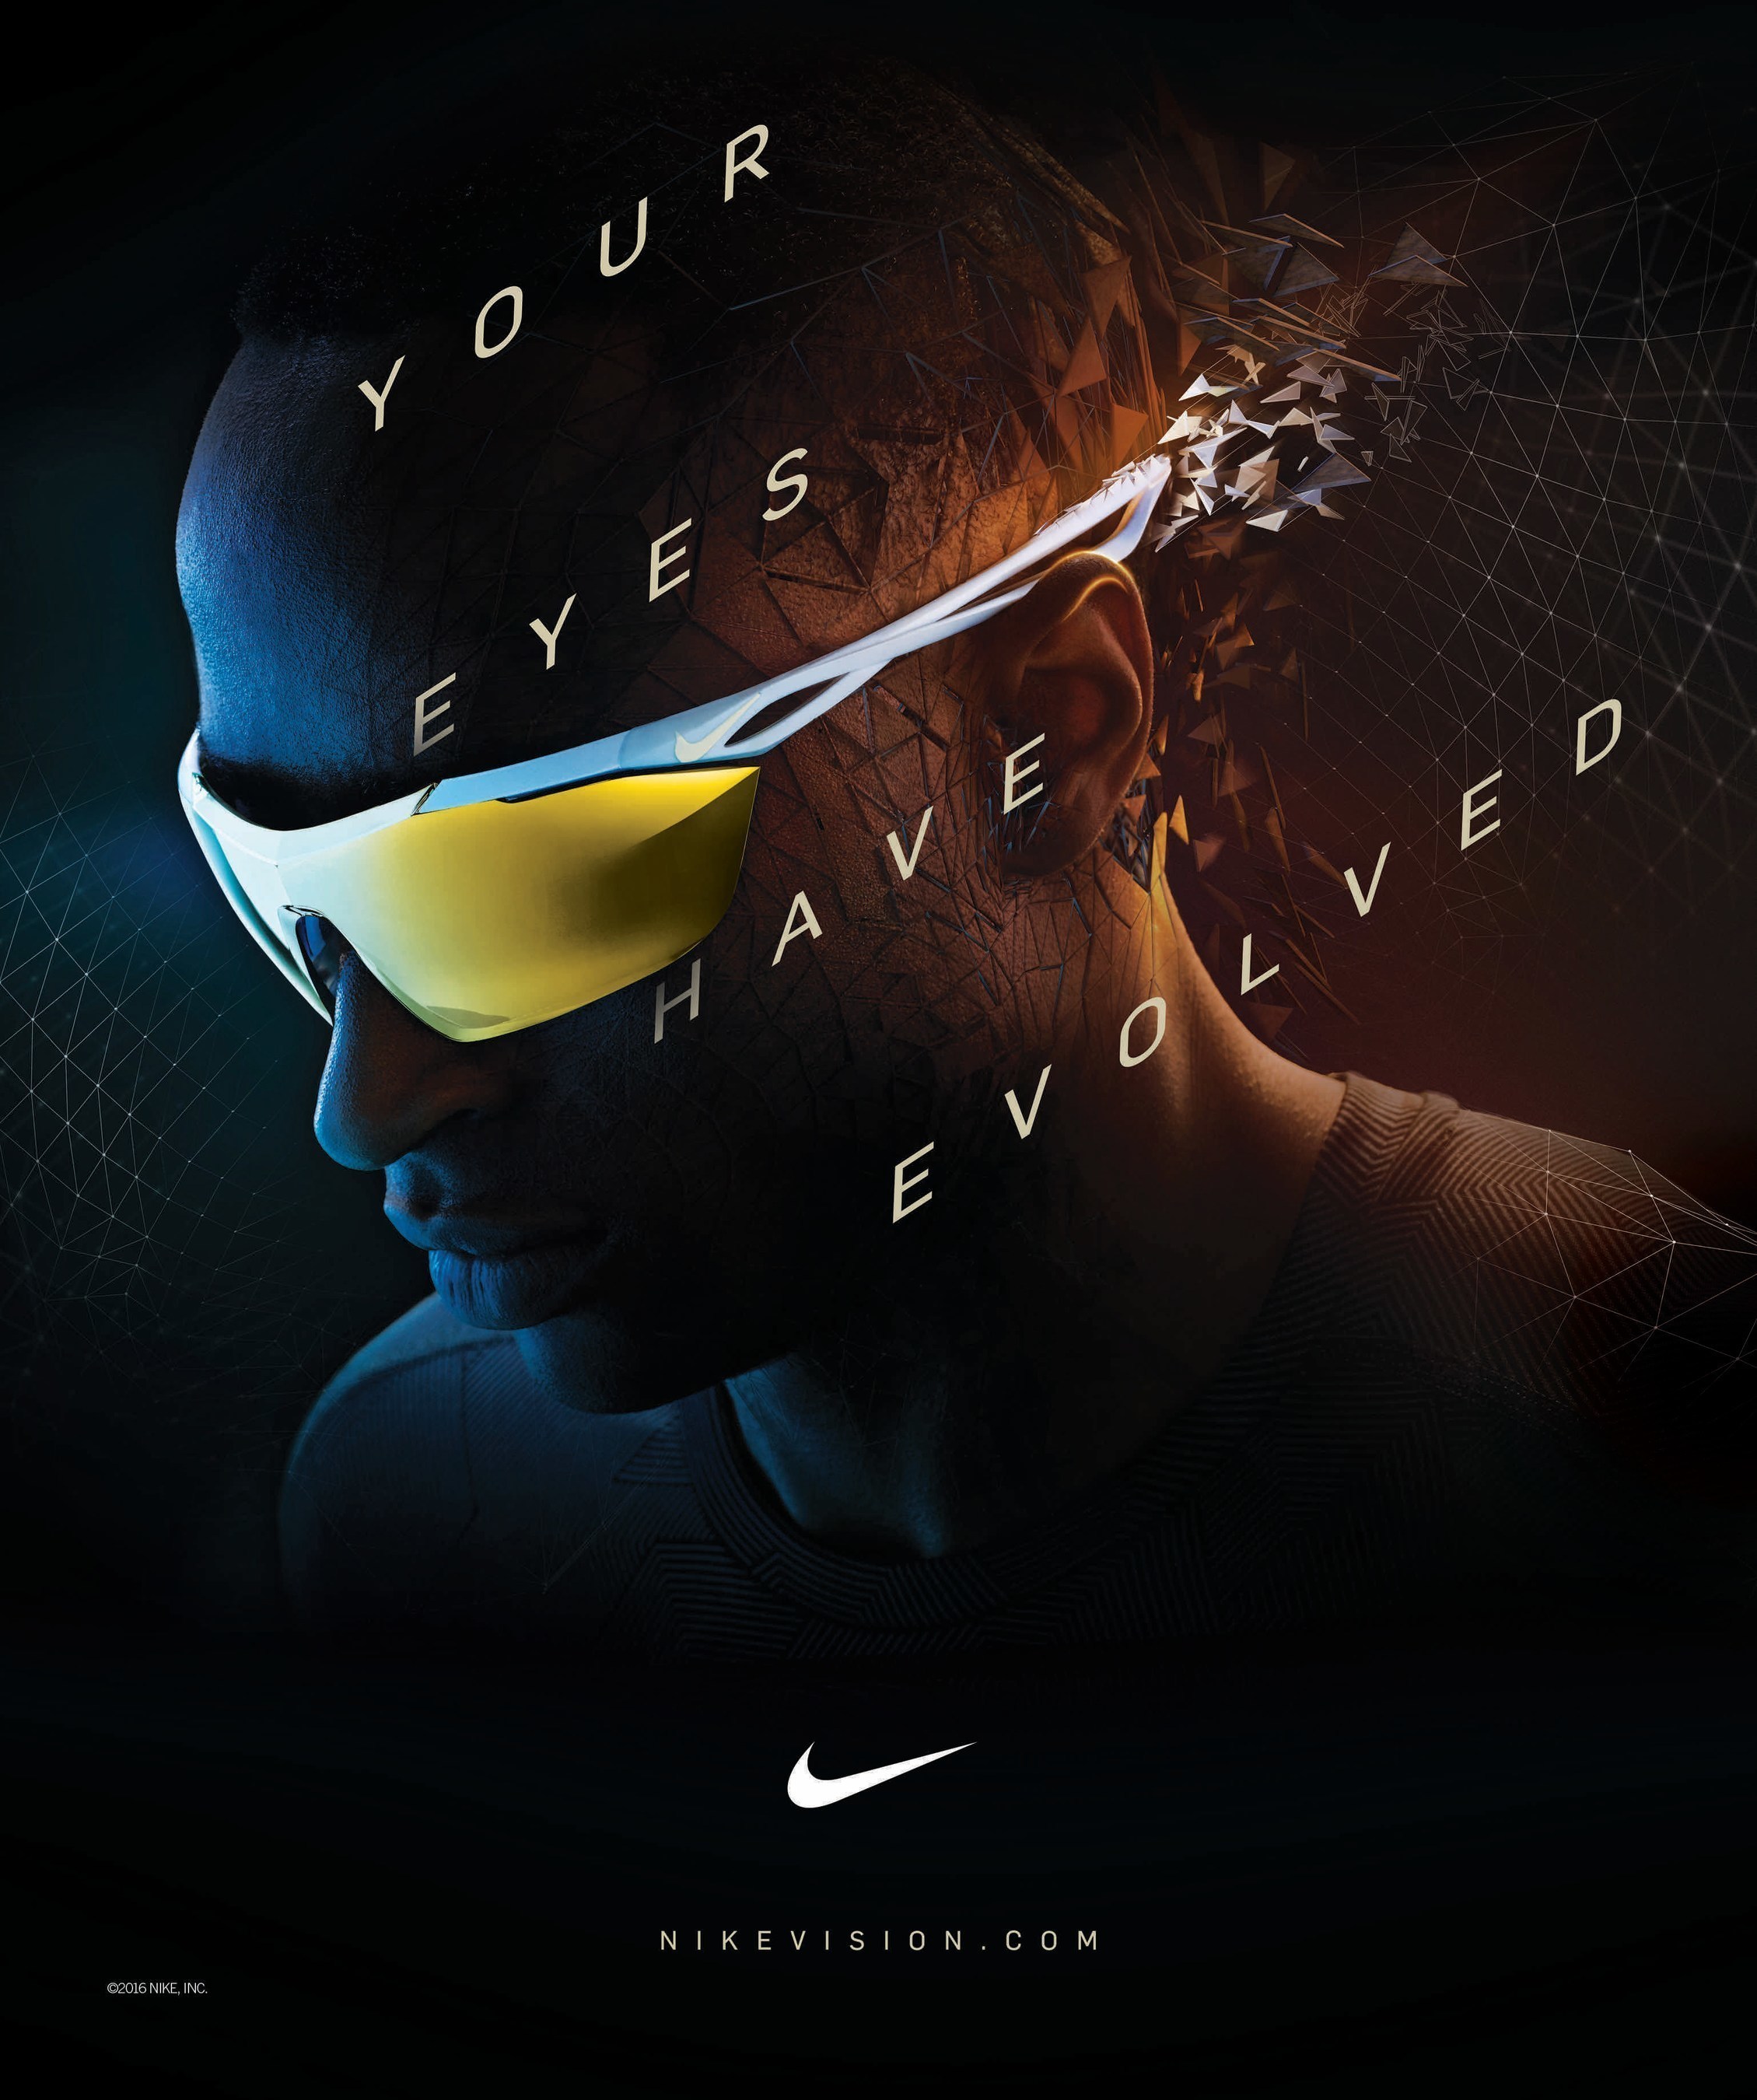 NIKE VISION SPRING 2016 RUNNING COLLECTION USES INNOVATIVE DESIGN AND TECHNOLOGY.New Collection Launches "Your Eyes Have Evolved" Campaign.